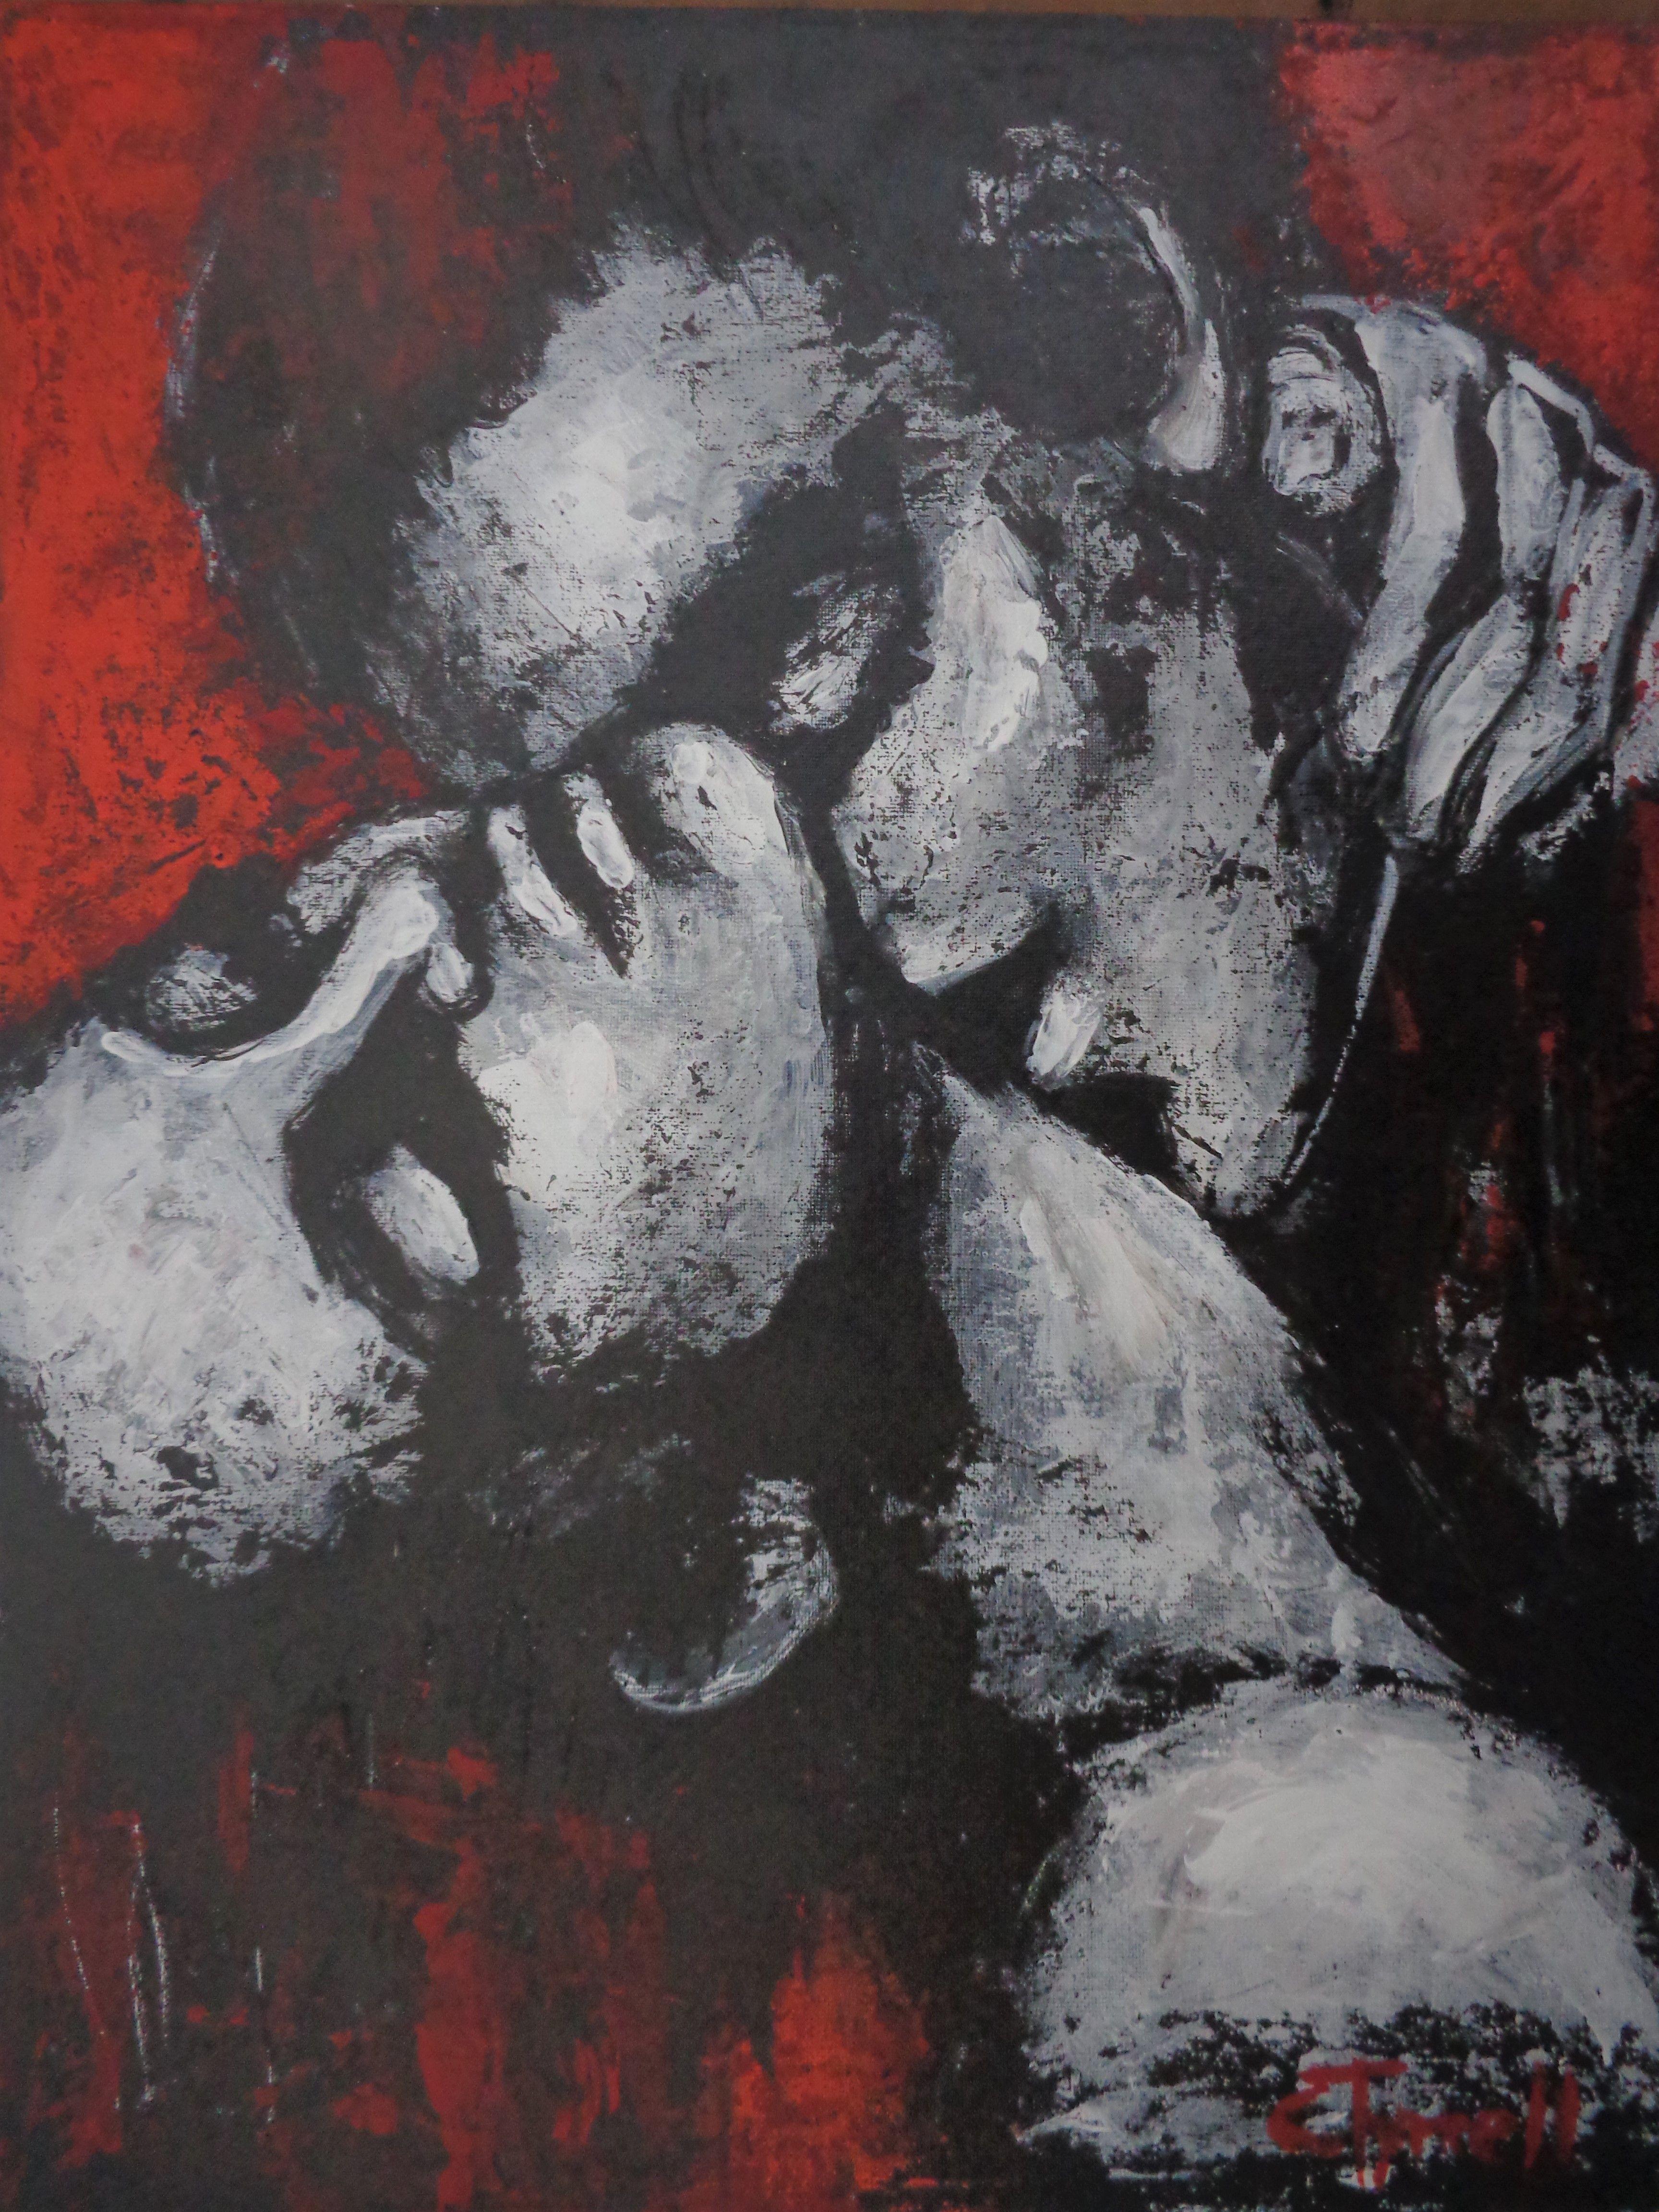 Original figurative acrylics painting on canvas board, unframed, part of a new series. Expressive and powerful image of a man and a woman passionately kissing. Textured painting made using black, white and red acrylics applied with a palette knife.